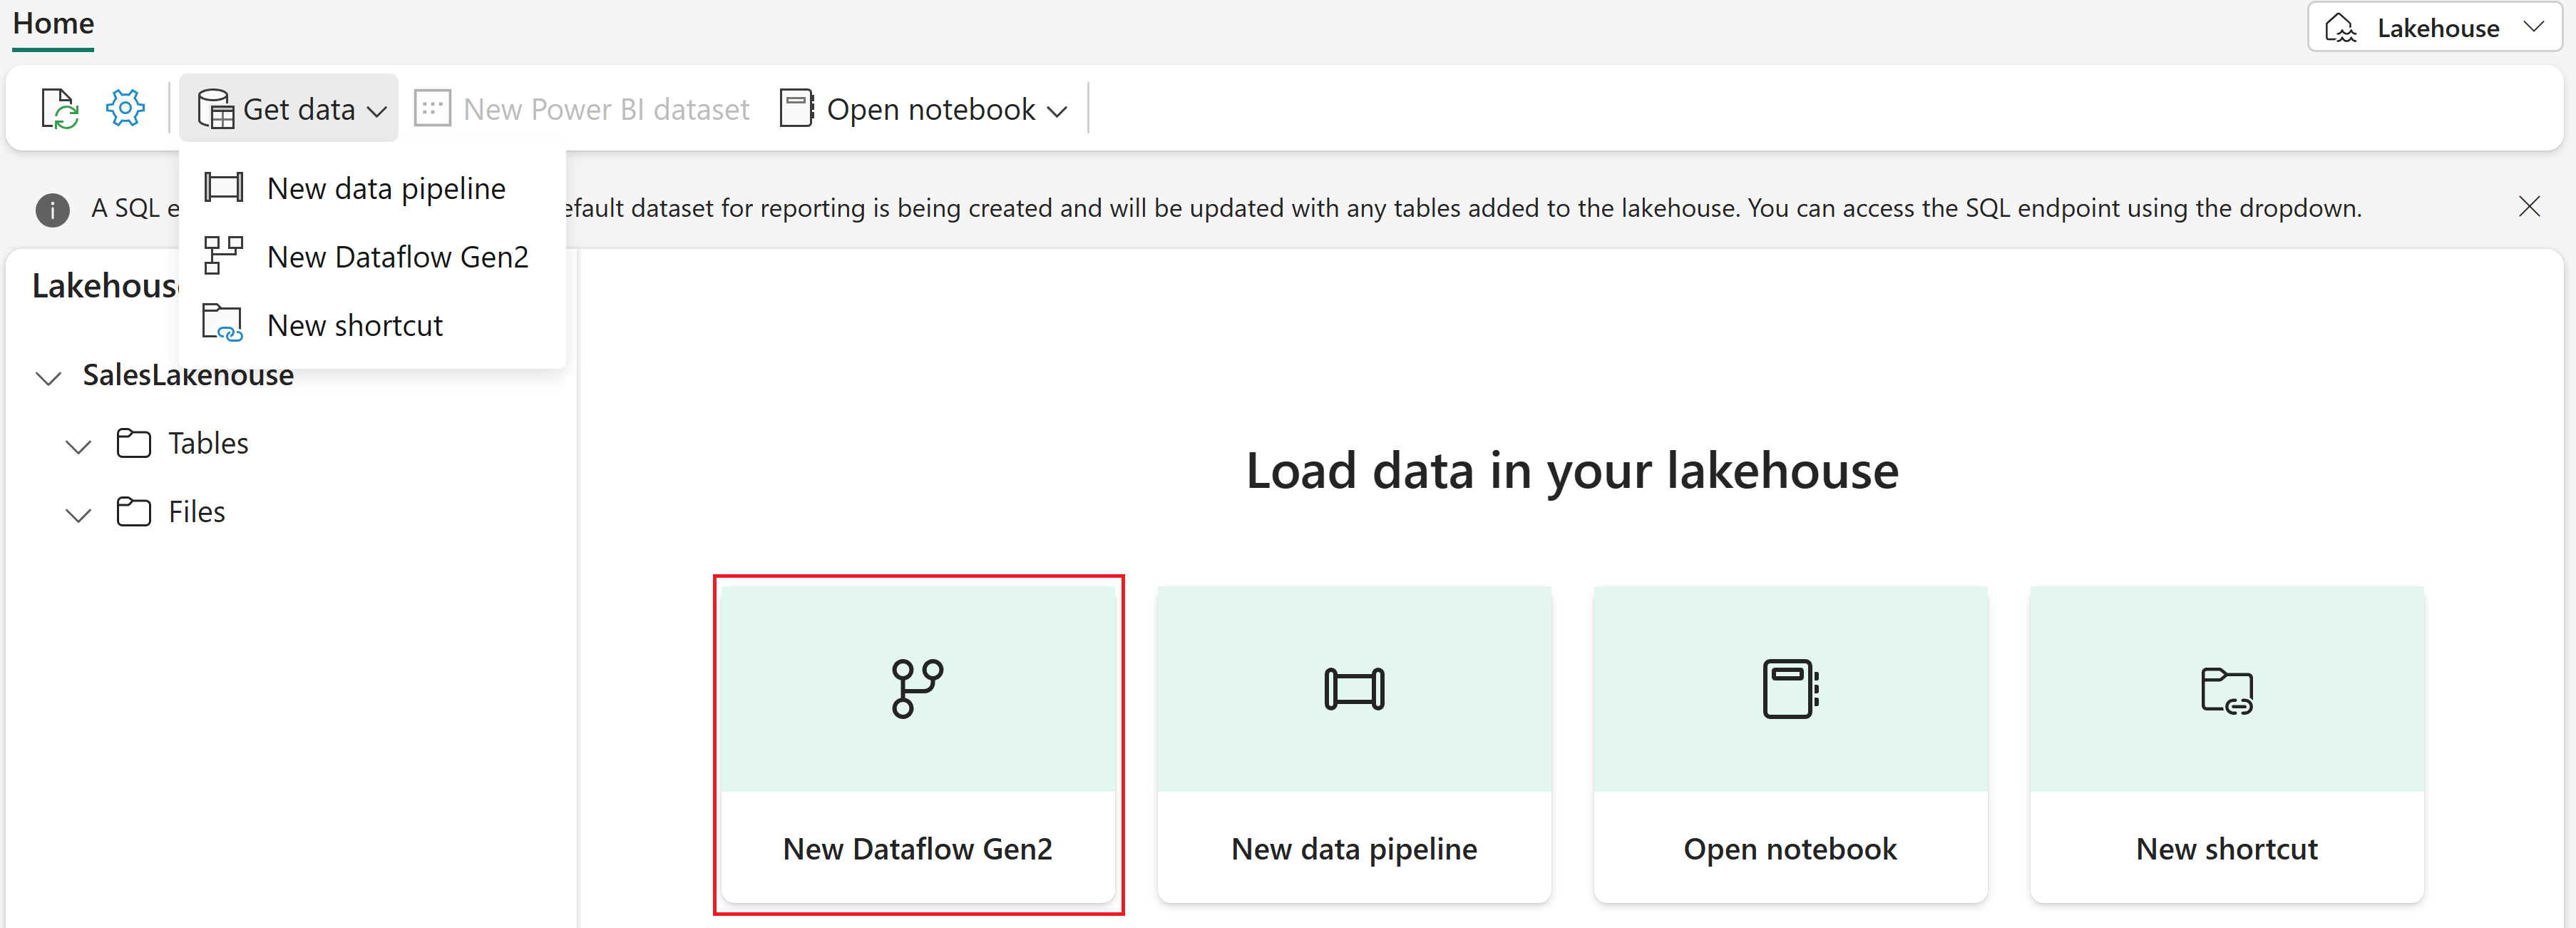 Screenshot of Get data drop down in the Lakehouse editor.